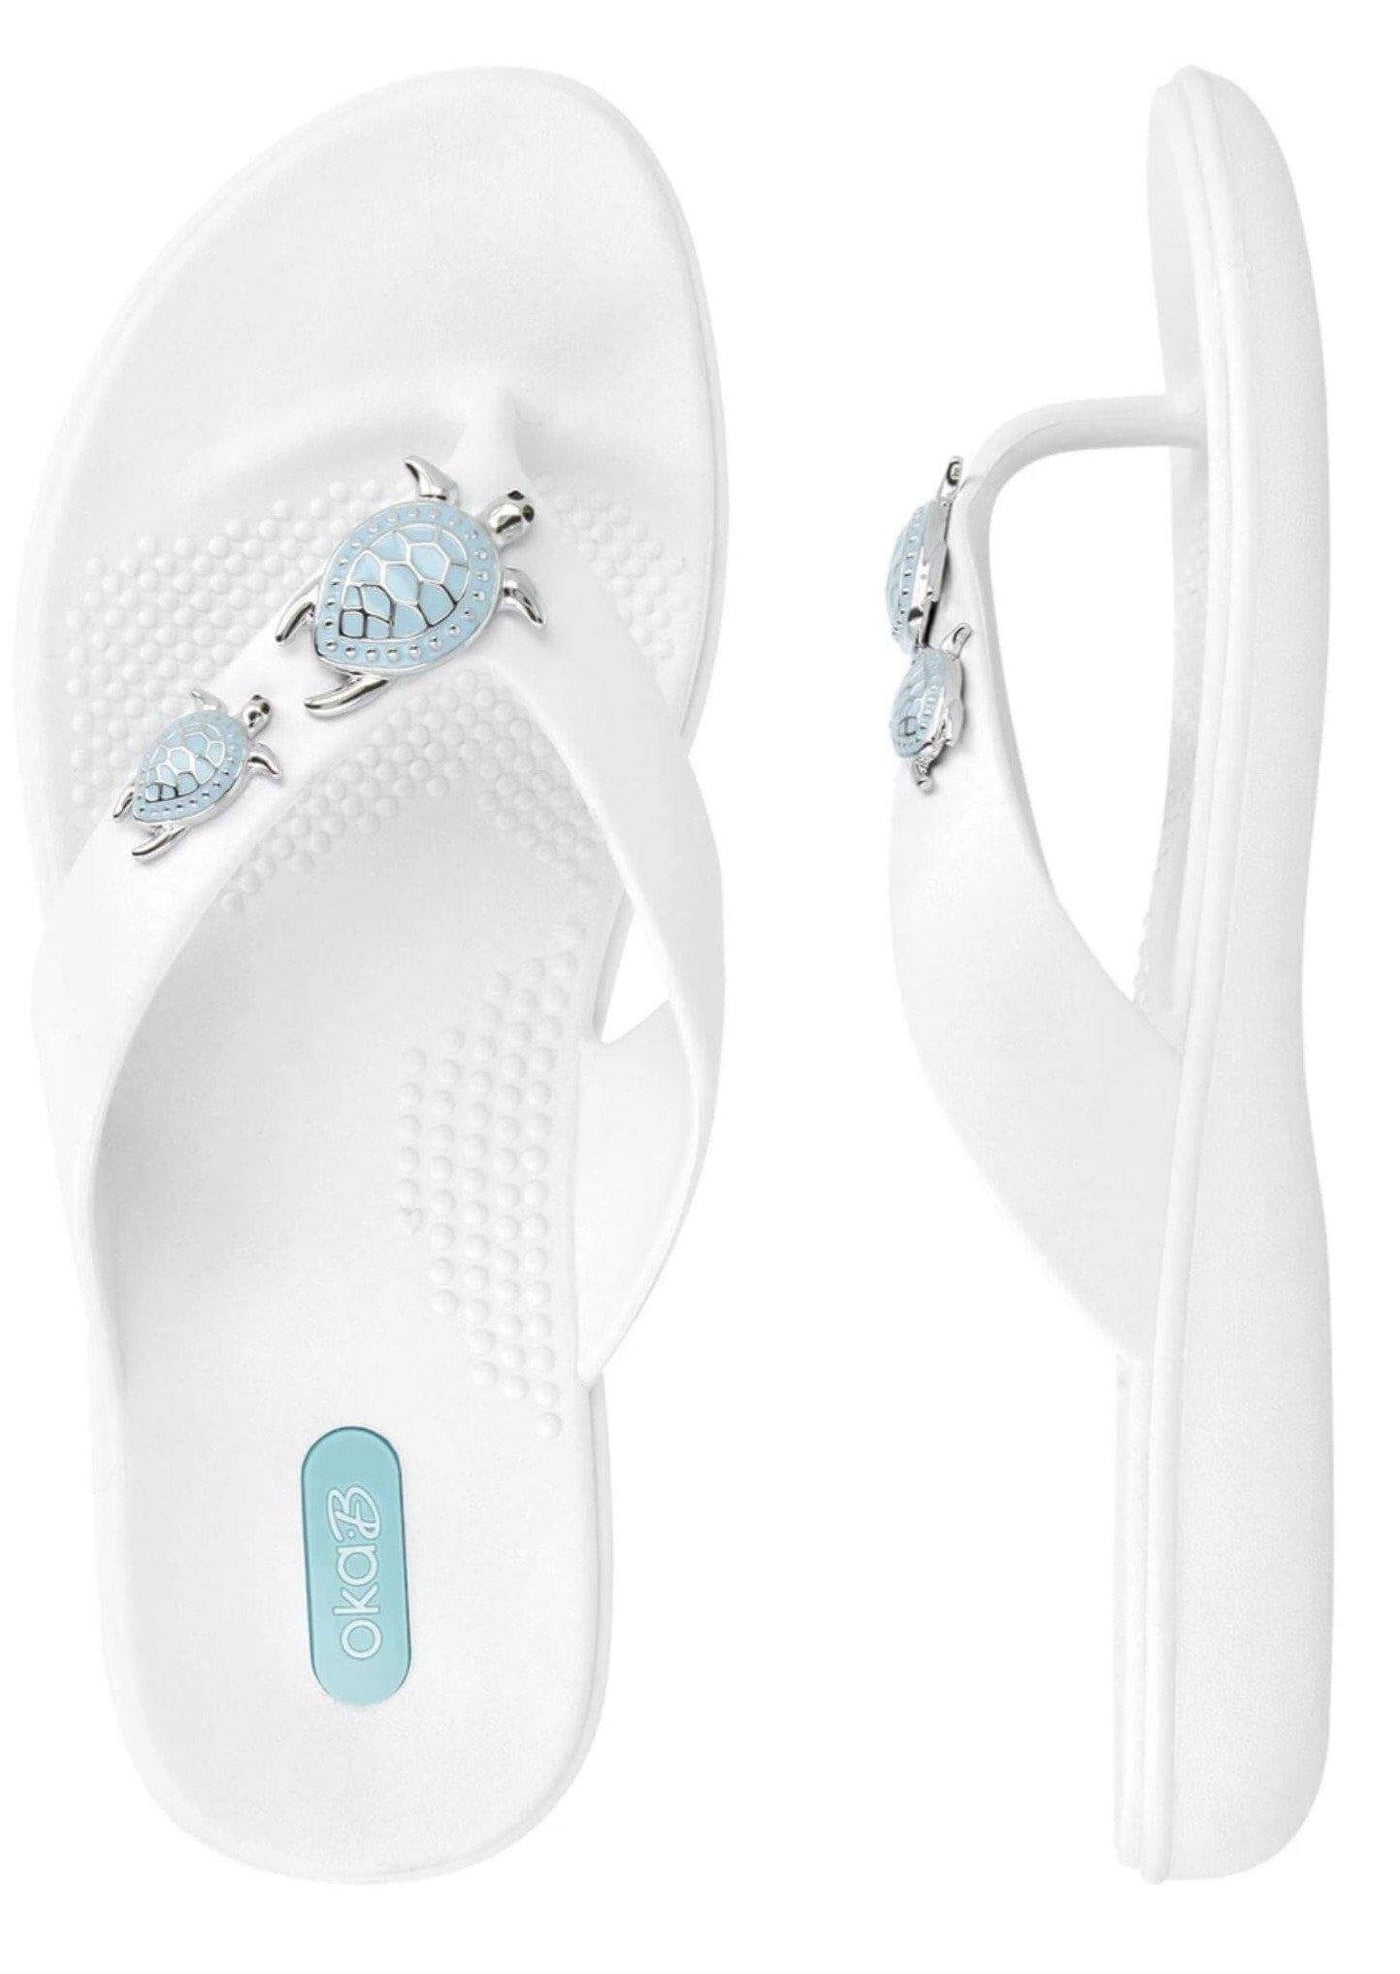 Brand: Oka-B - Oka-B Theresa White Sea Turtle Sandals -  beach, Beach Wear, Featured, Flip Flops, Flower, Made in America, made in usa, Sandals, Shoes made local, Spring, Summer, Theresa, Turtle, White, Women - Classy Cozy Cool Boutique